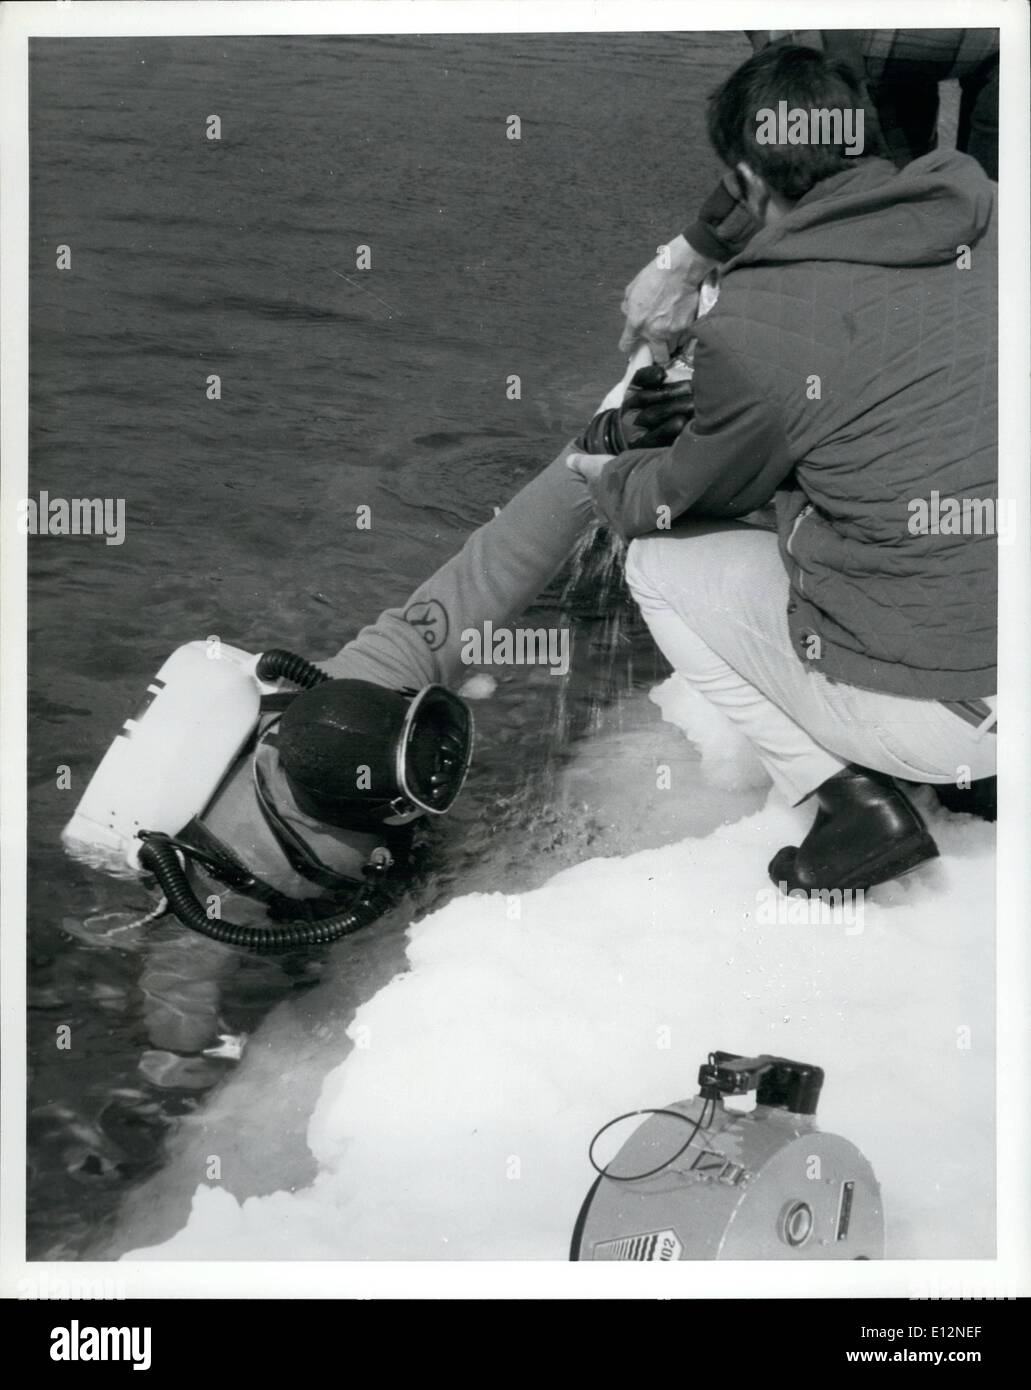 Feb. 24, 2012 - Diver surfaces in frigid waters following test of a closed-cycle breathing device developed by Oceans System Programs of General Electric's Re-entry and Environmental Systems Division, Philadelphia. Unlike conventional SCUBA equipment which had freezing problems the closed-cycle system ''performed perfectly'' the company said. Stock Photo